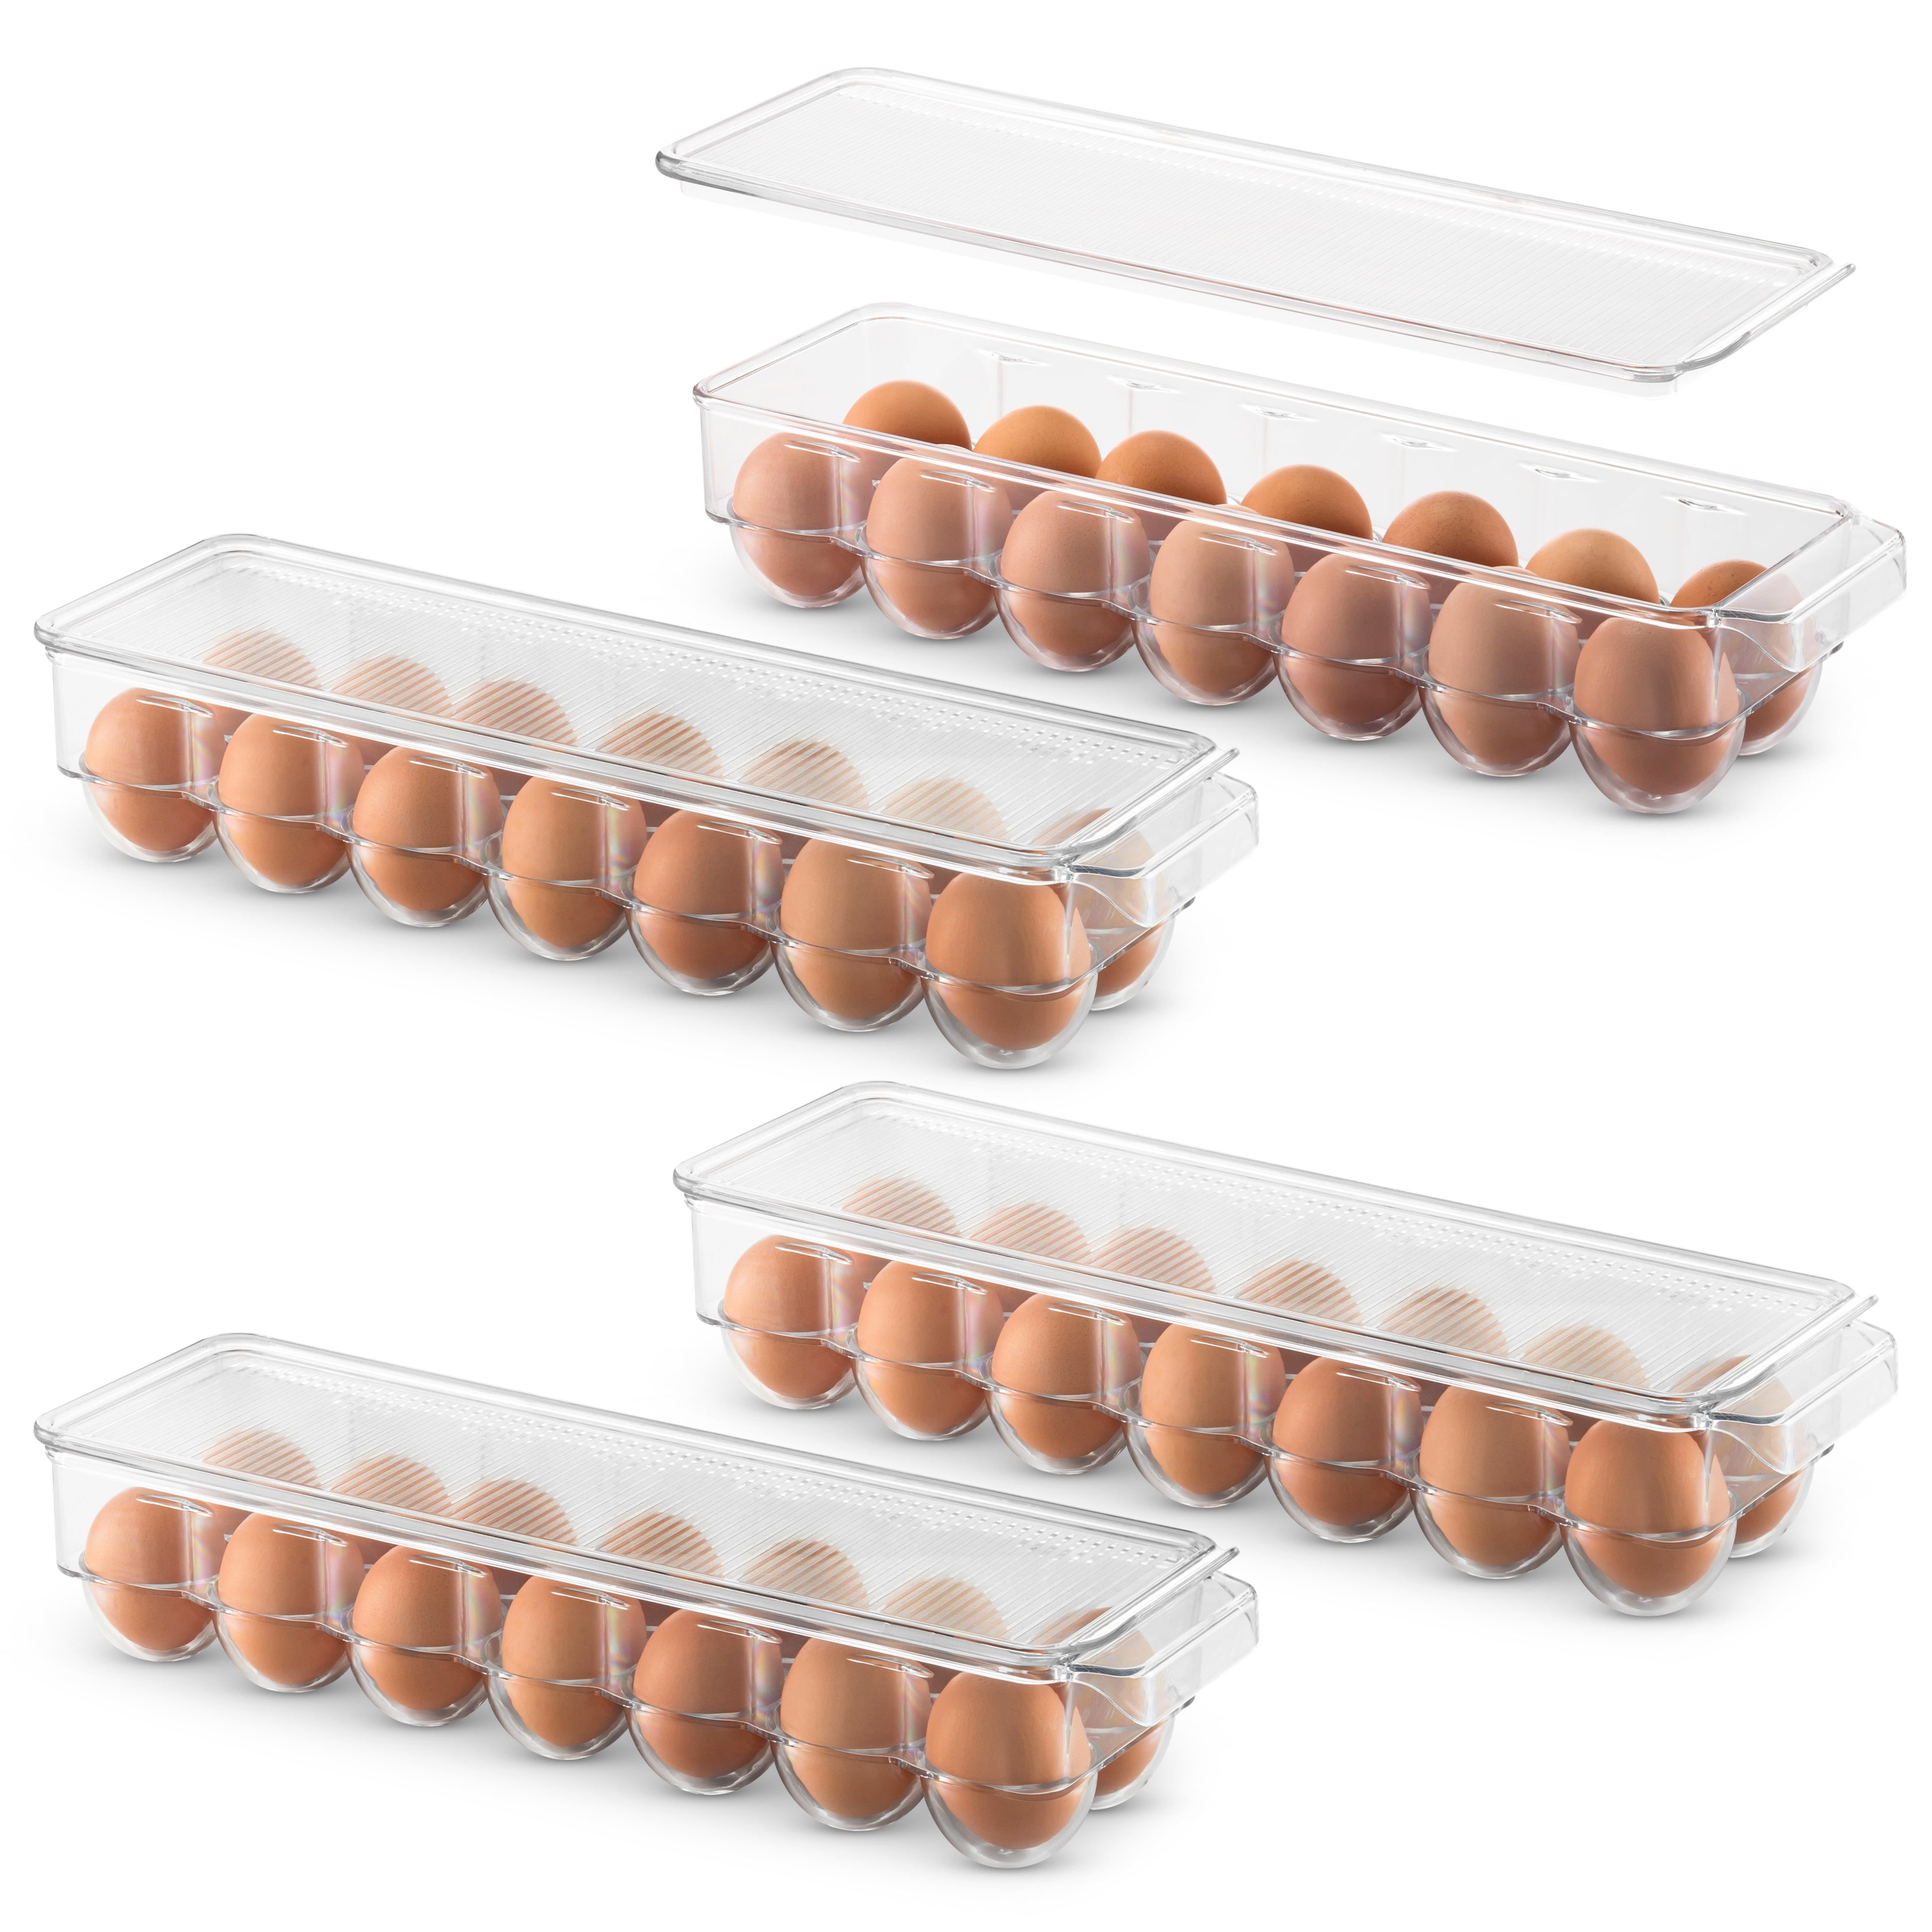 Flexzion Covered 15 Eggs Holder Plastic Eggs Tray Container Dispenser Case Carton Box Carrier Stackable Storage Organizer Storer Keeper with Clear Lid Large Capacity for Refrigerator Fridge Home 